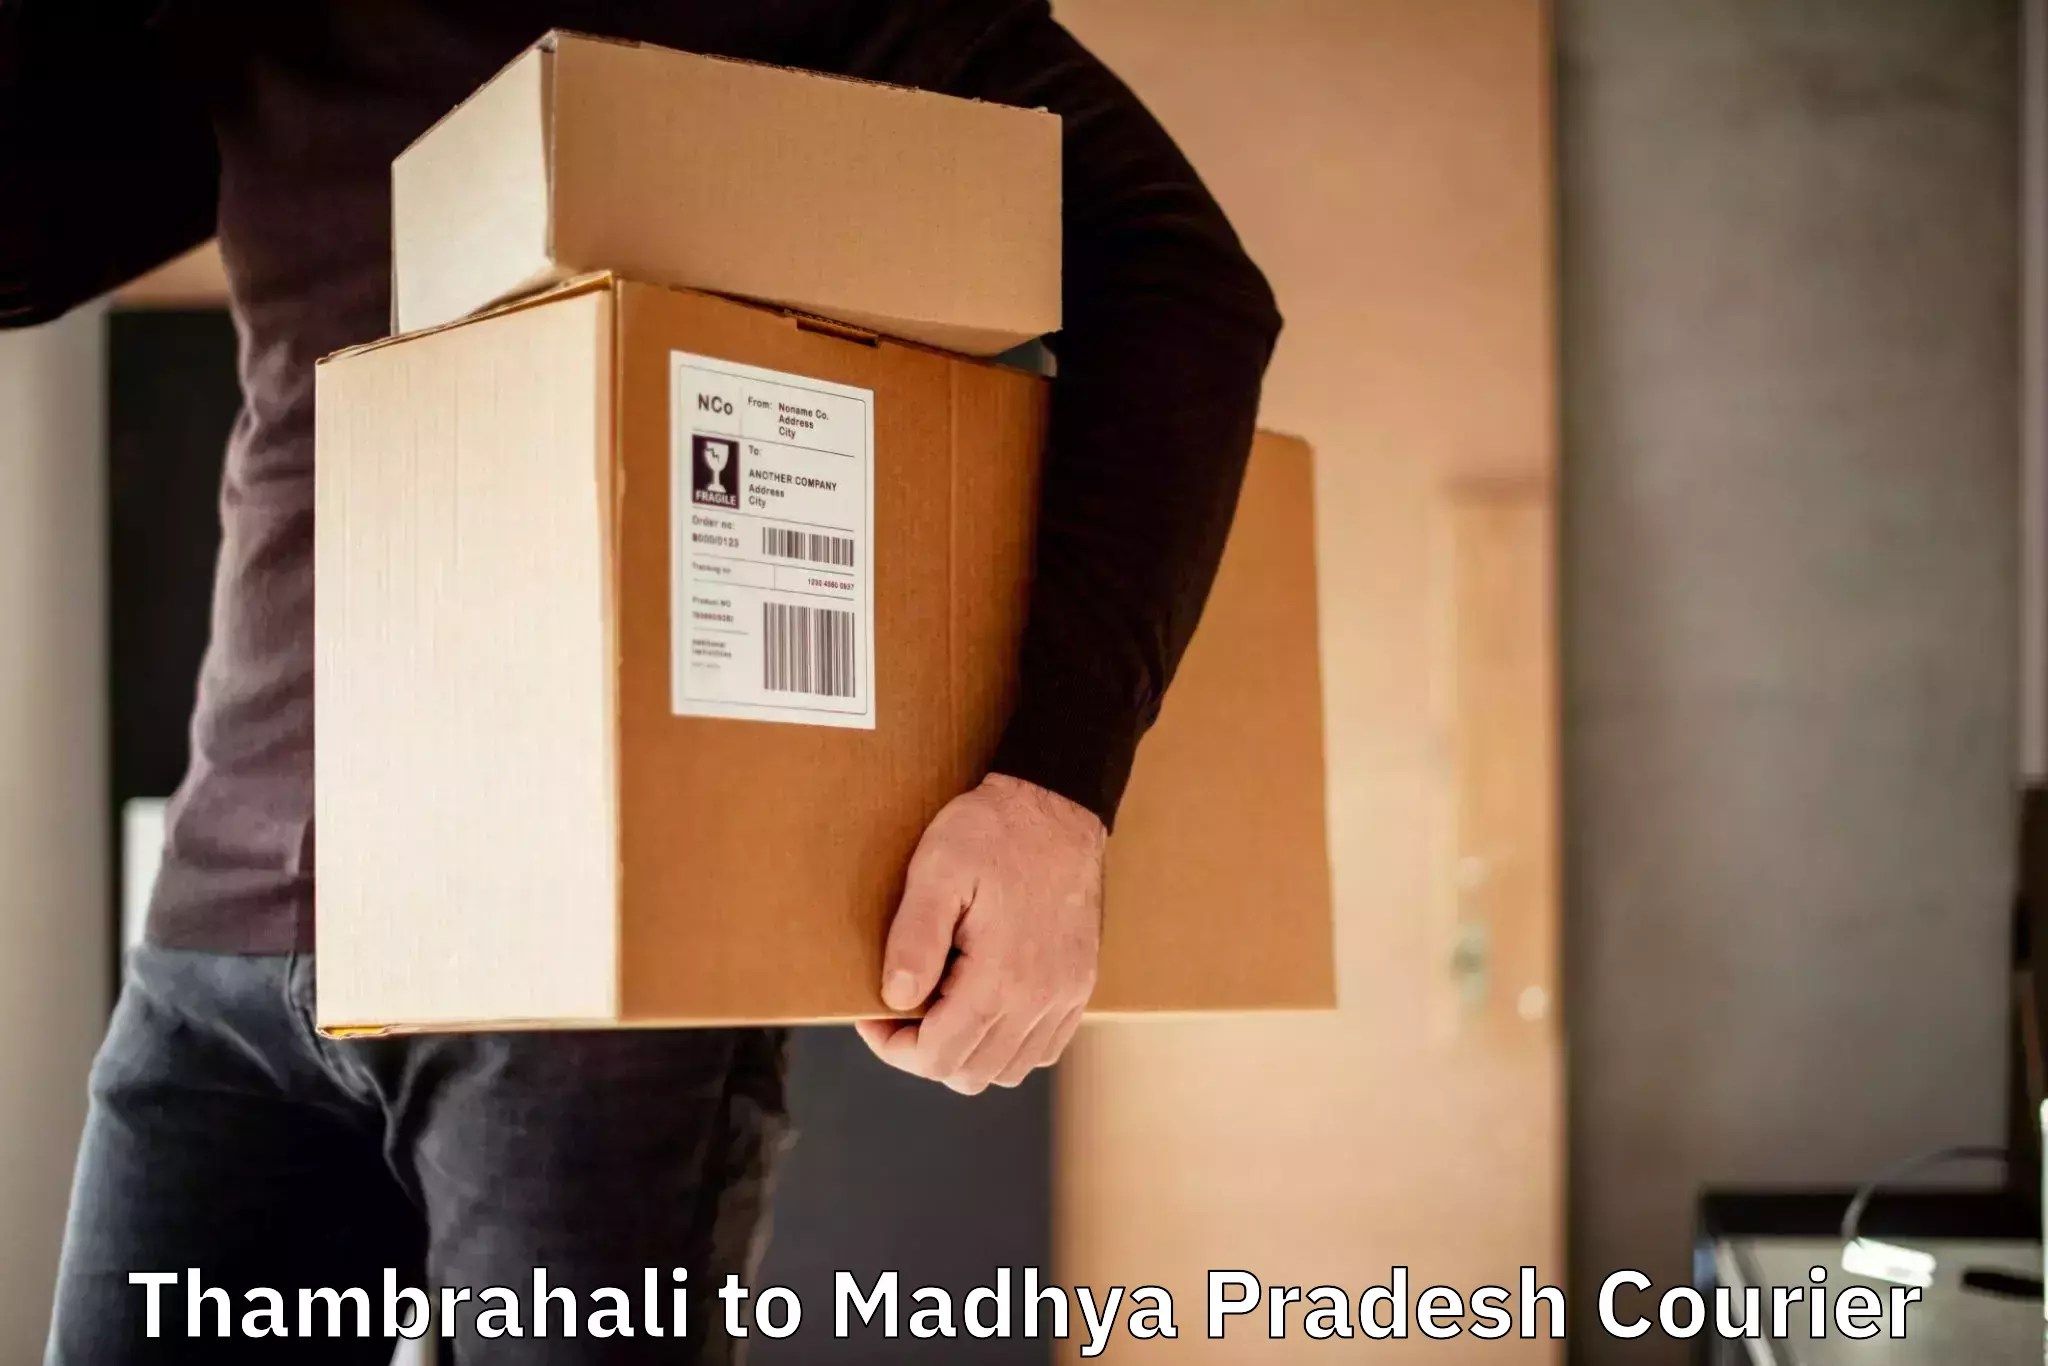 International courier networks Thambrahali to Raghogarh